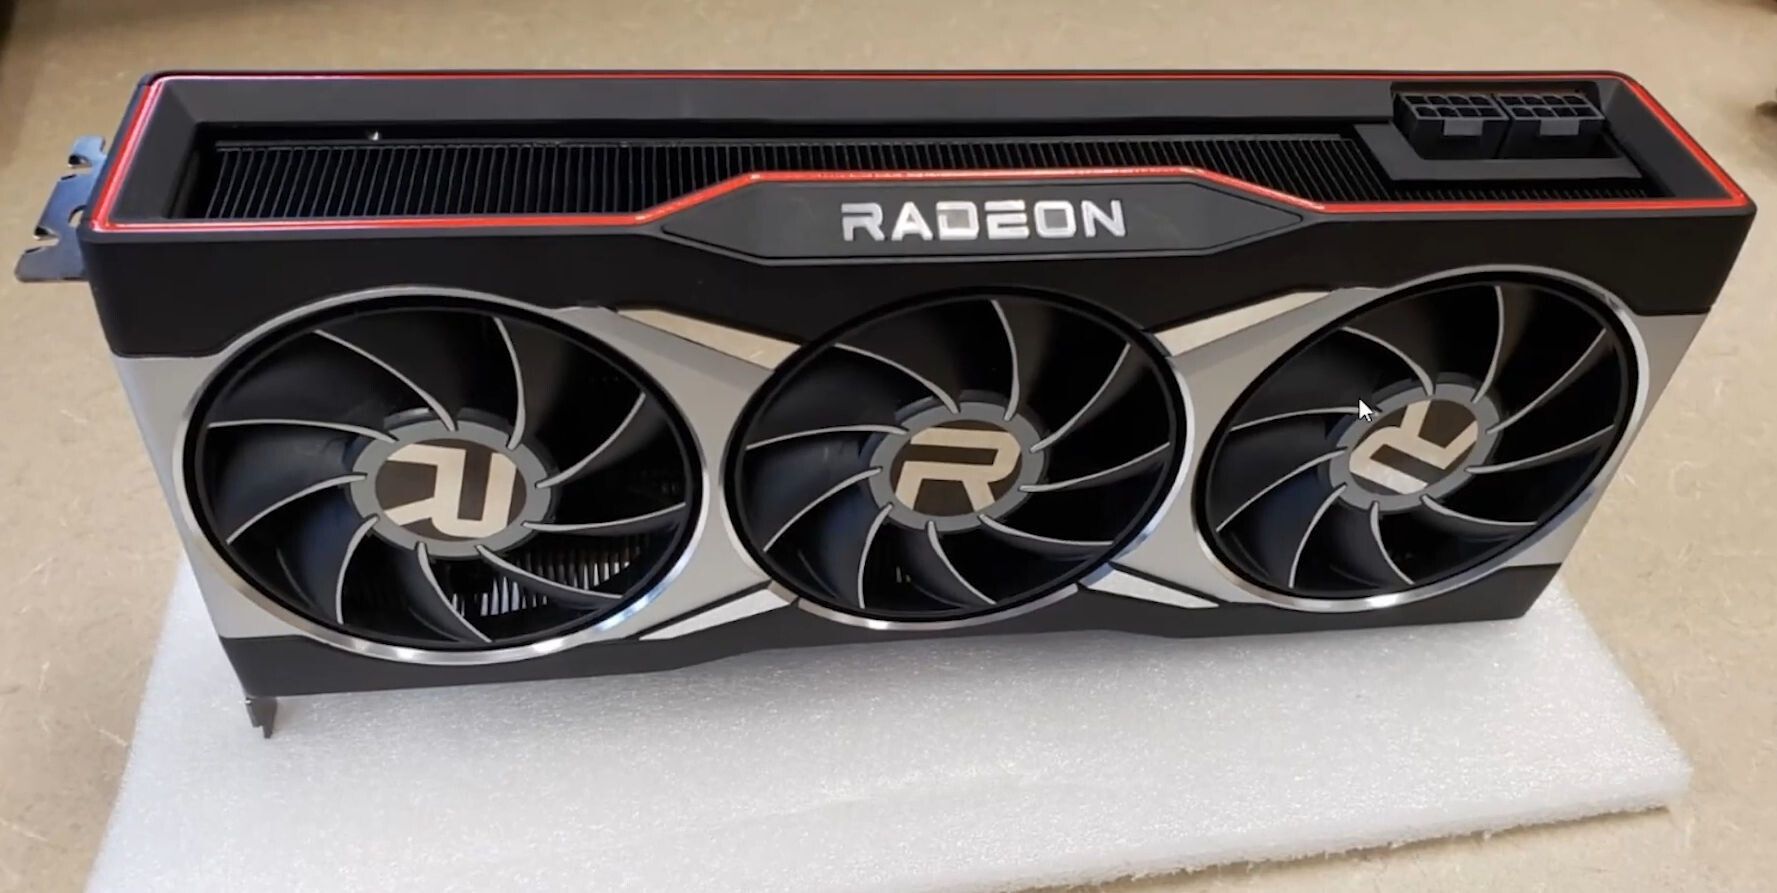 Design for the AMD Radeon RX 6900